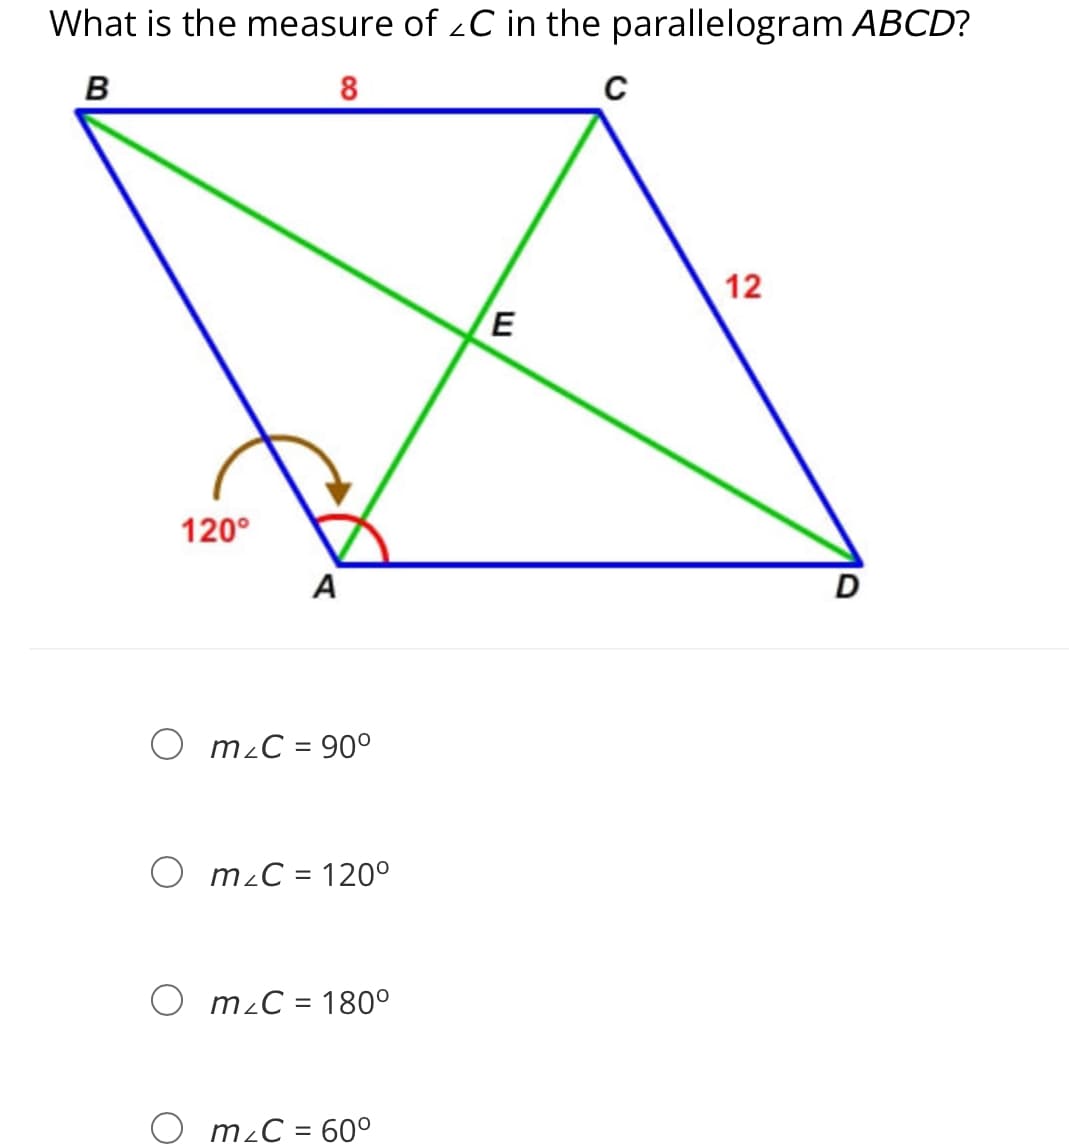 What is the measure of zC in the parallelogram ABCD?
B
12
E
120°
A
D
O mzC = 90°
O mzC = 120°
m C = 180°
||
O mzC = 60°
